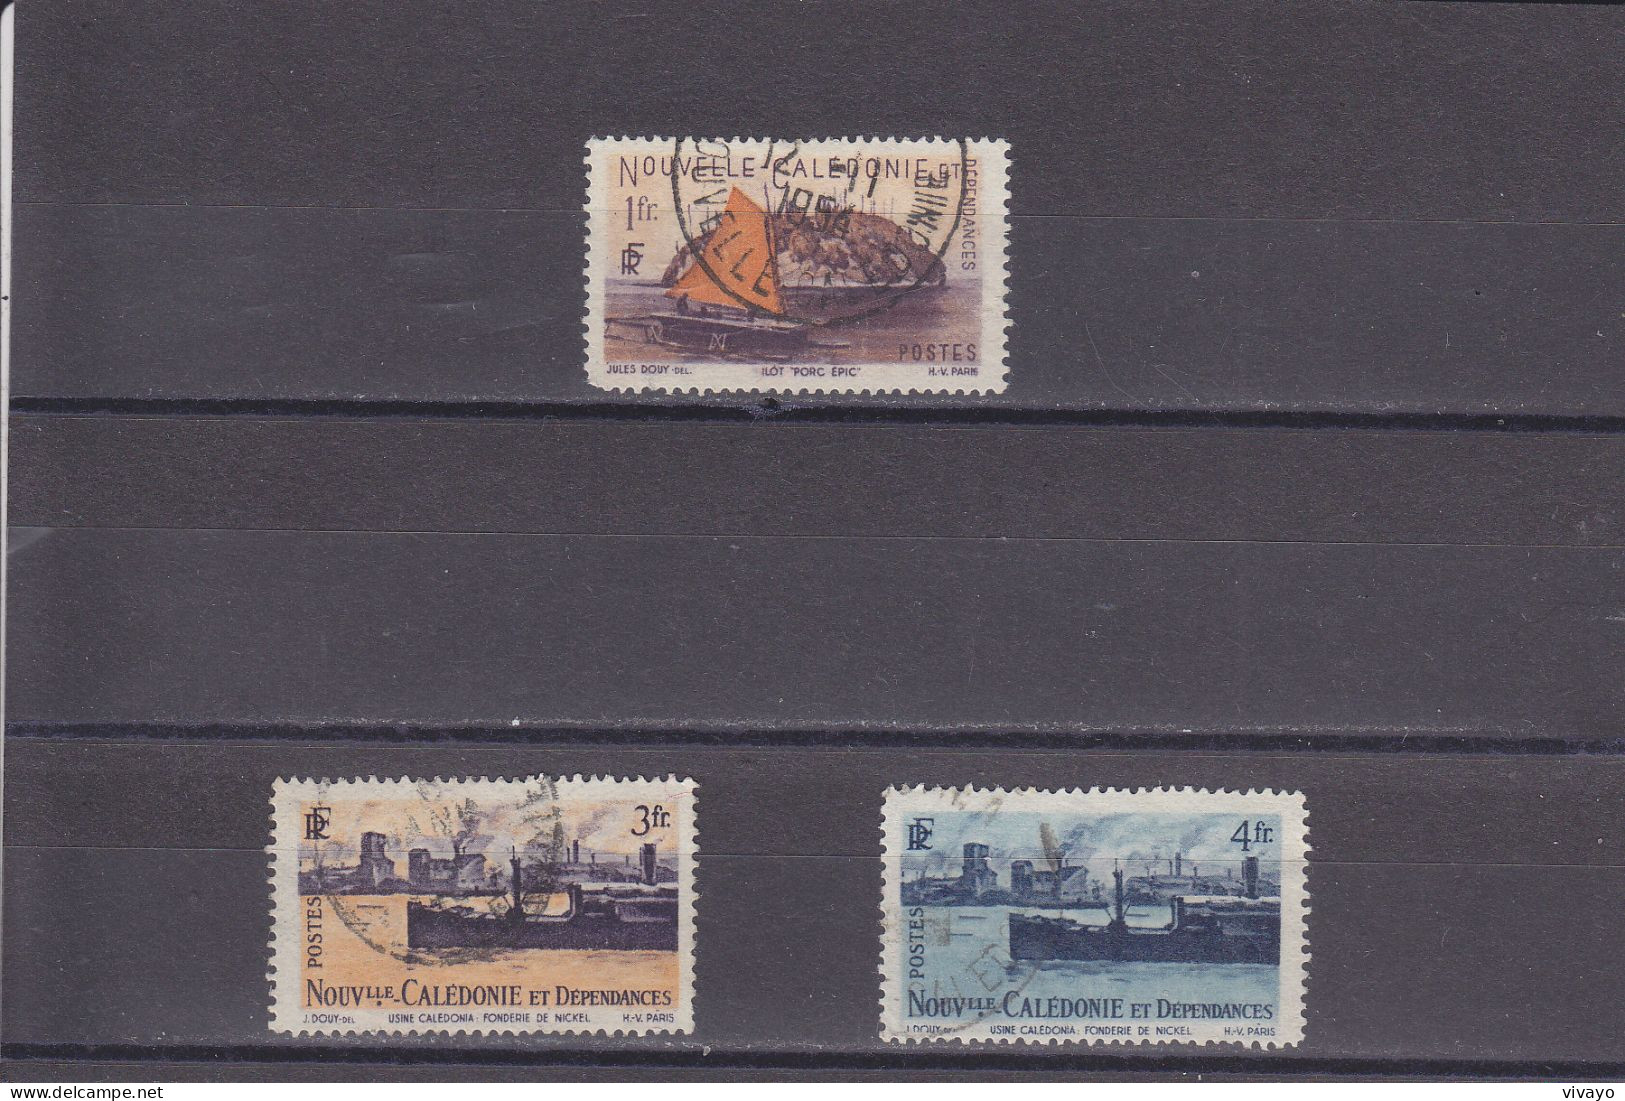 NOUVELLE CALEDONIE - O / FINE CANCELLED - 1948 - SAILING BOAT, STEAMER - Yv. 265, 270/1  - Mi. 332, 337/8 - Used Stamps